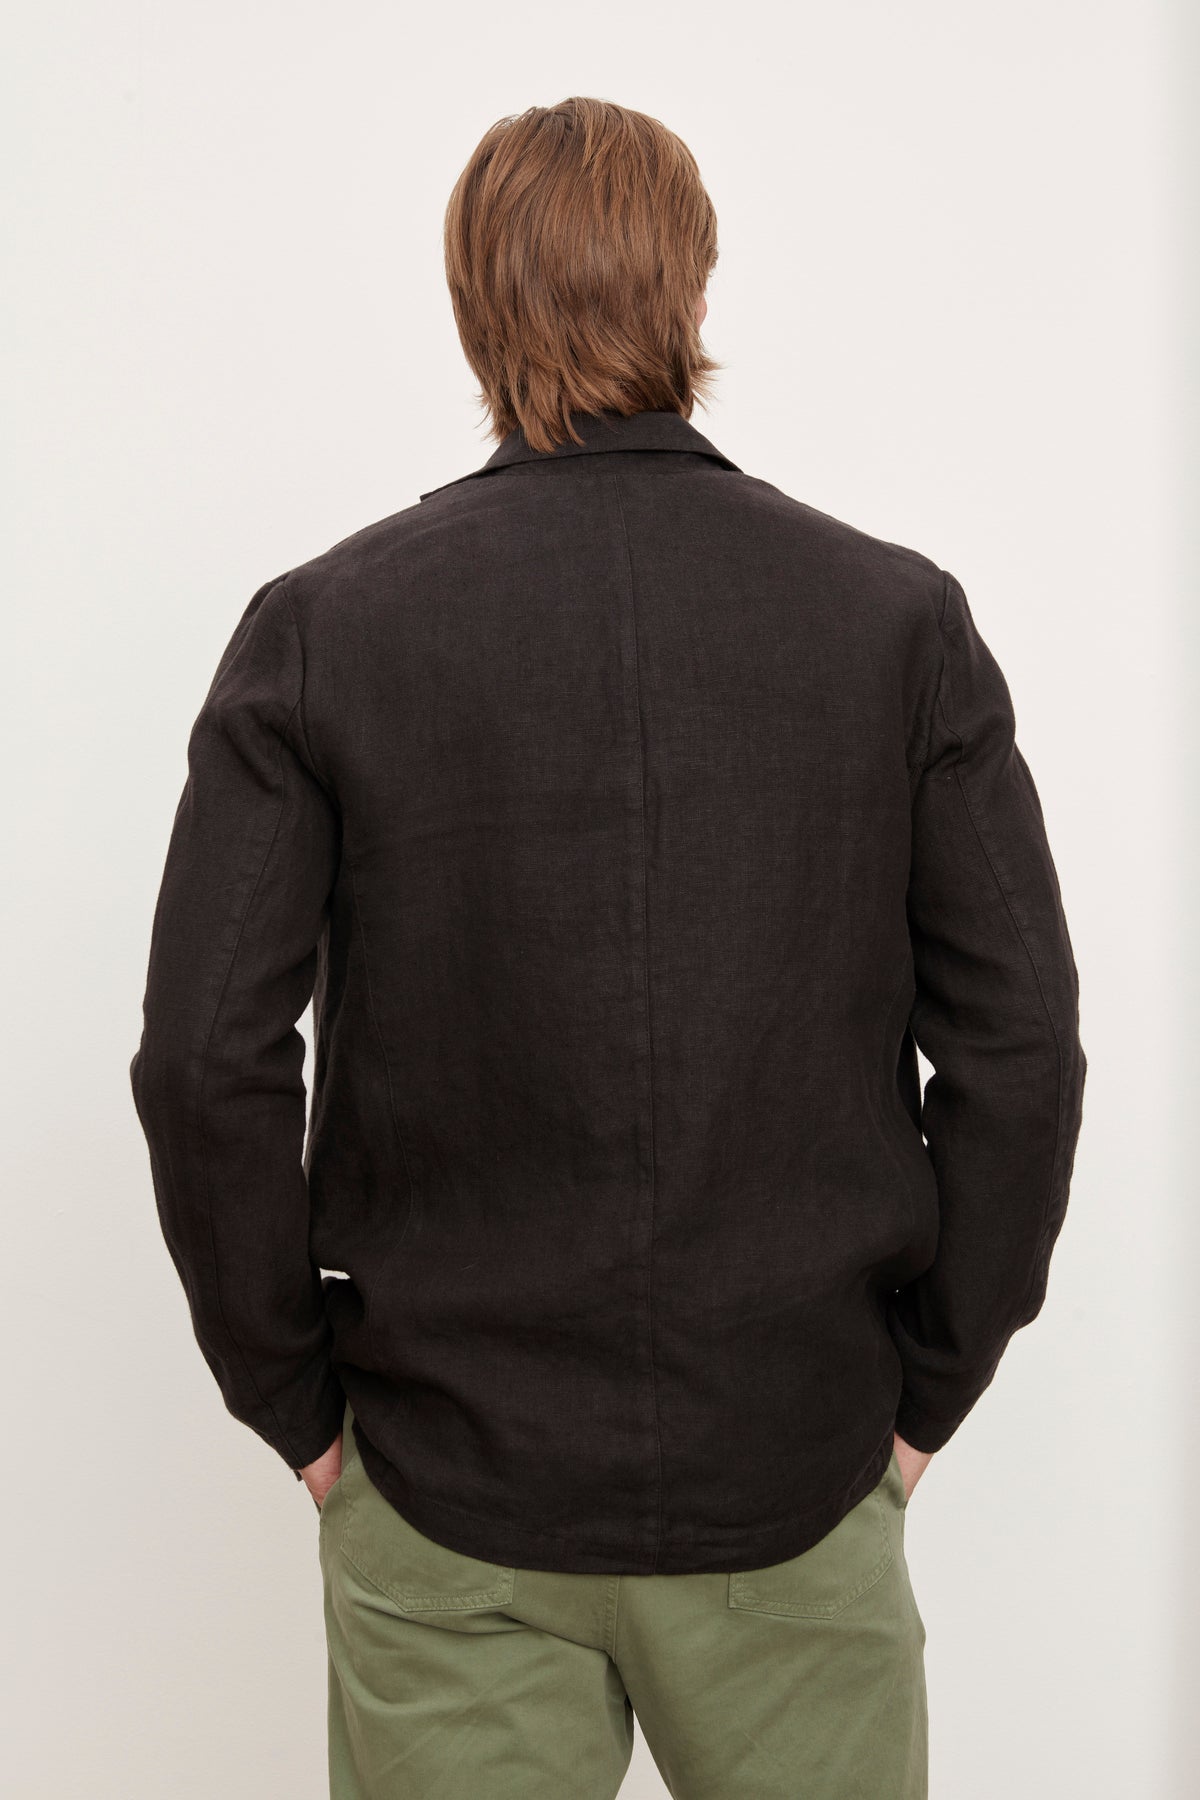 The back of a man wearing a Velvet by Graham & Spencer JOSHUA LINEN BLAZER and green pants.-36009998811329